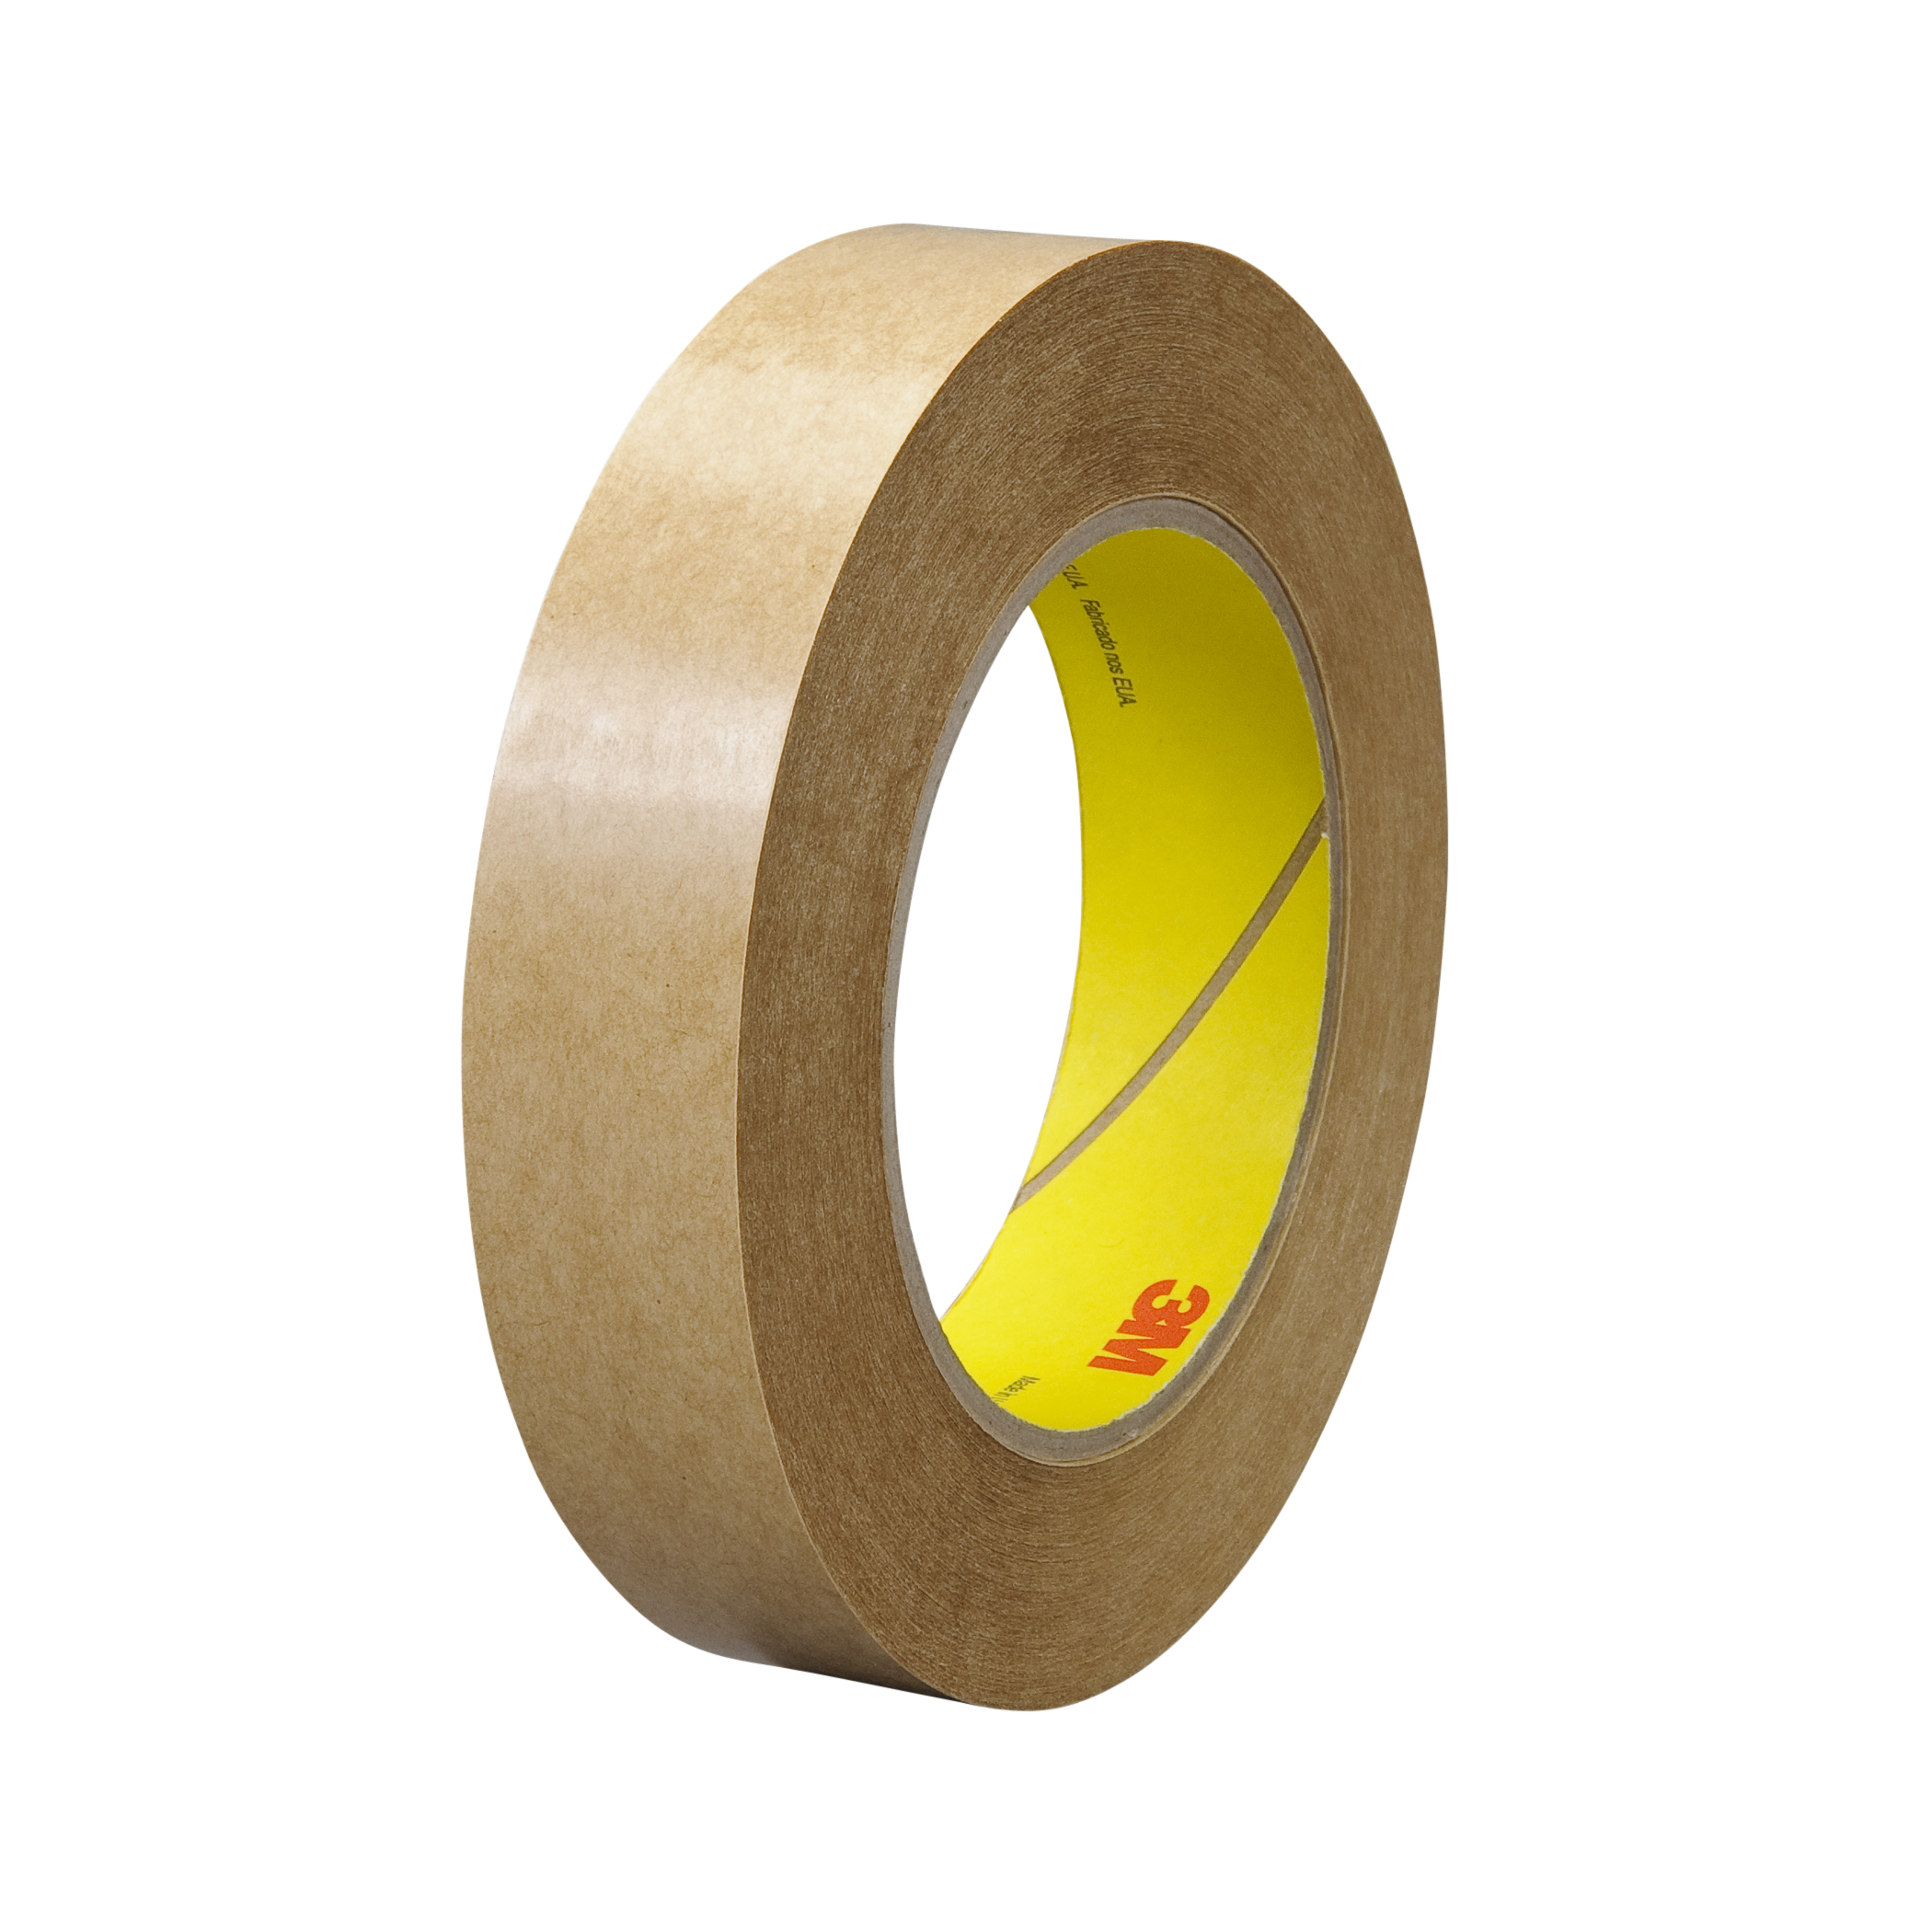 Part # 463, 3M™ Adhesive Transfer Tape On Converters, Inc.